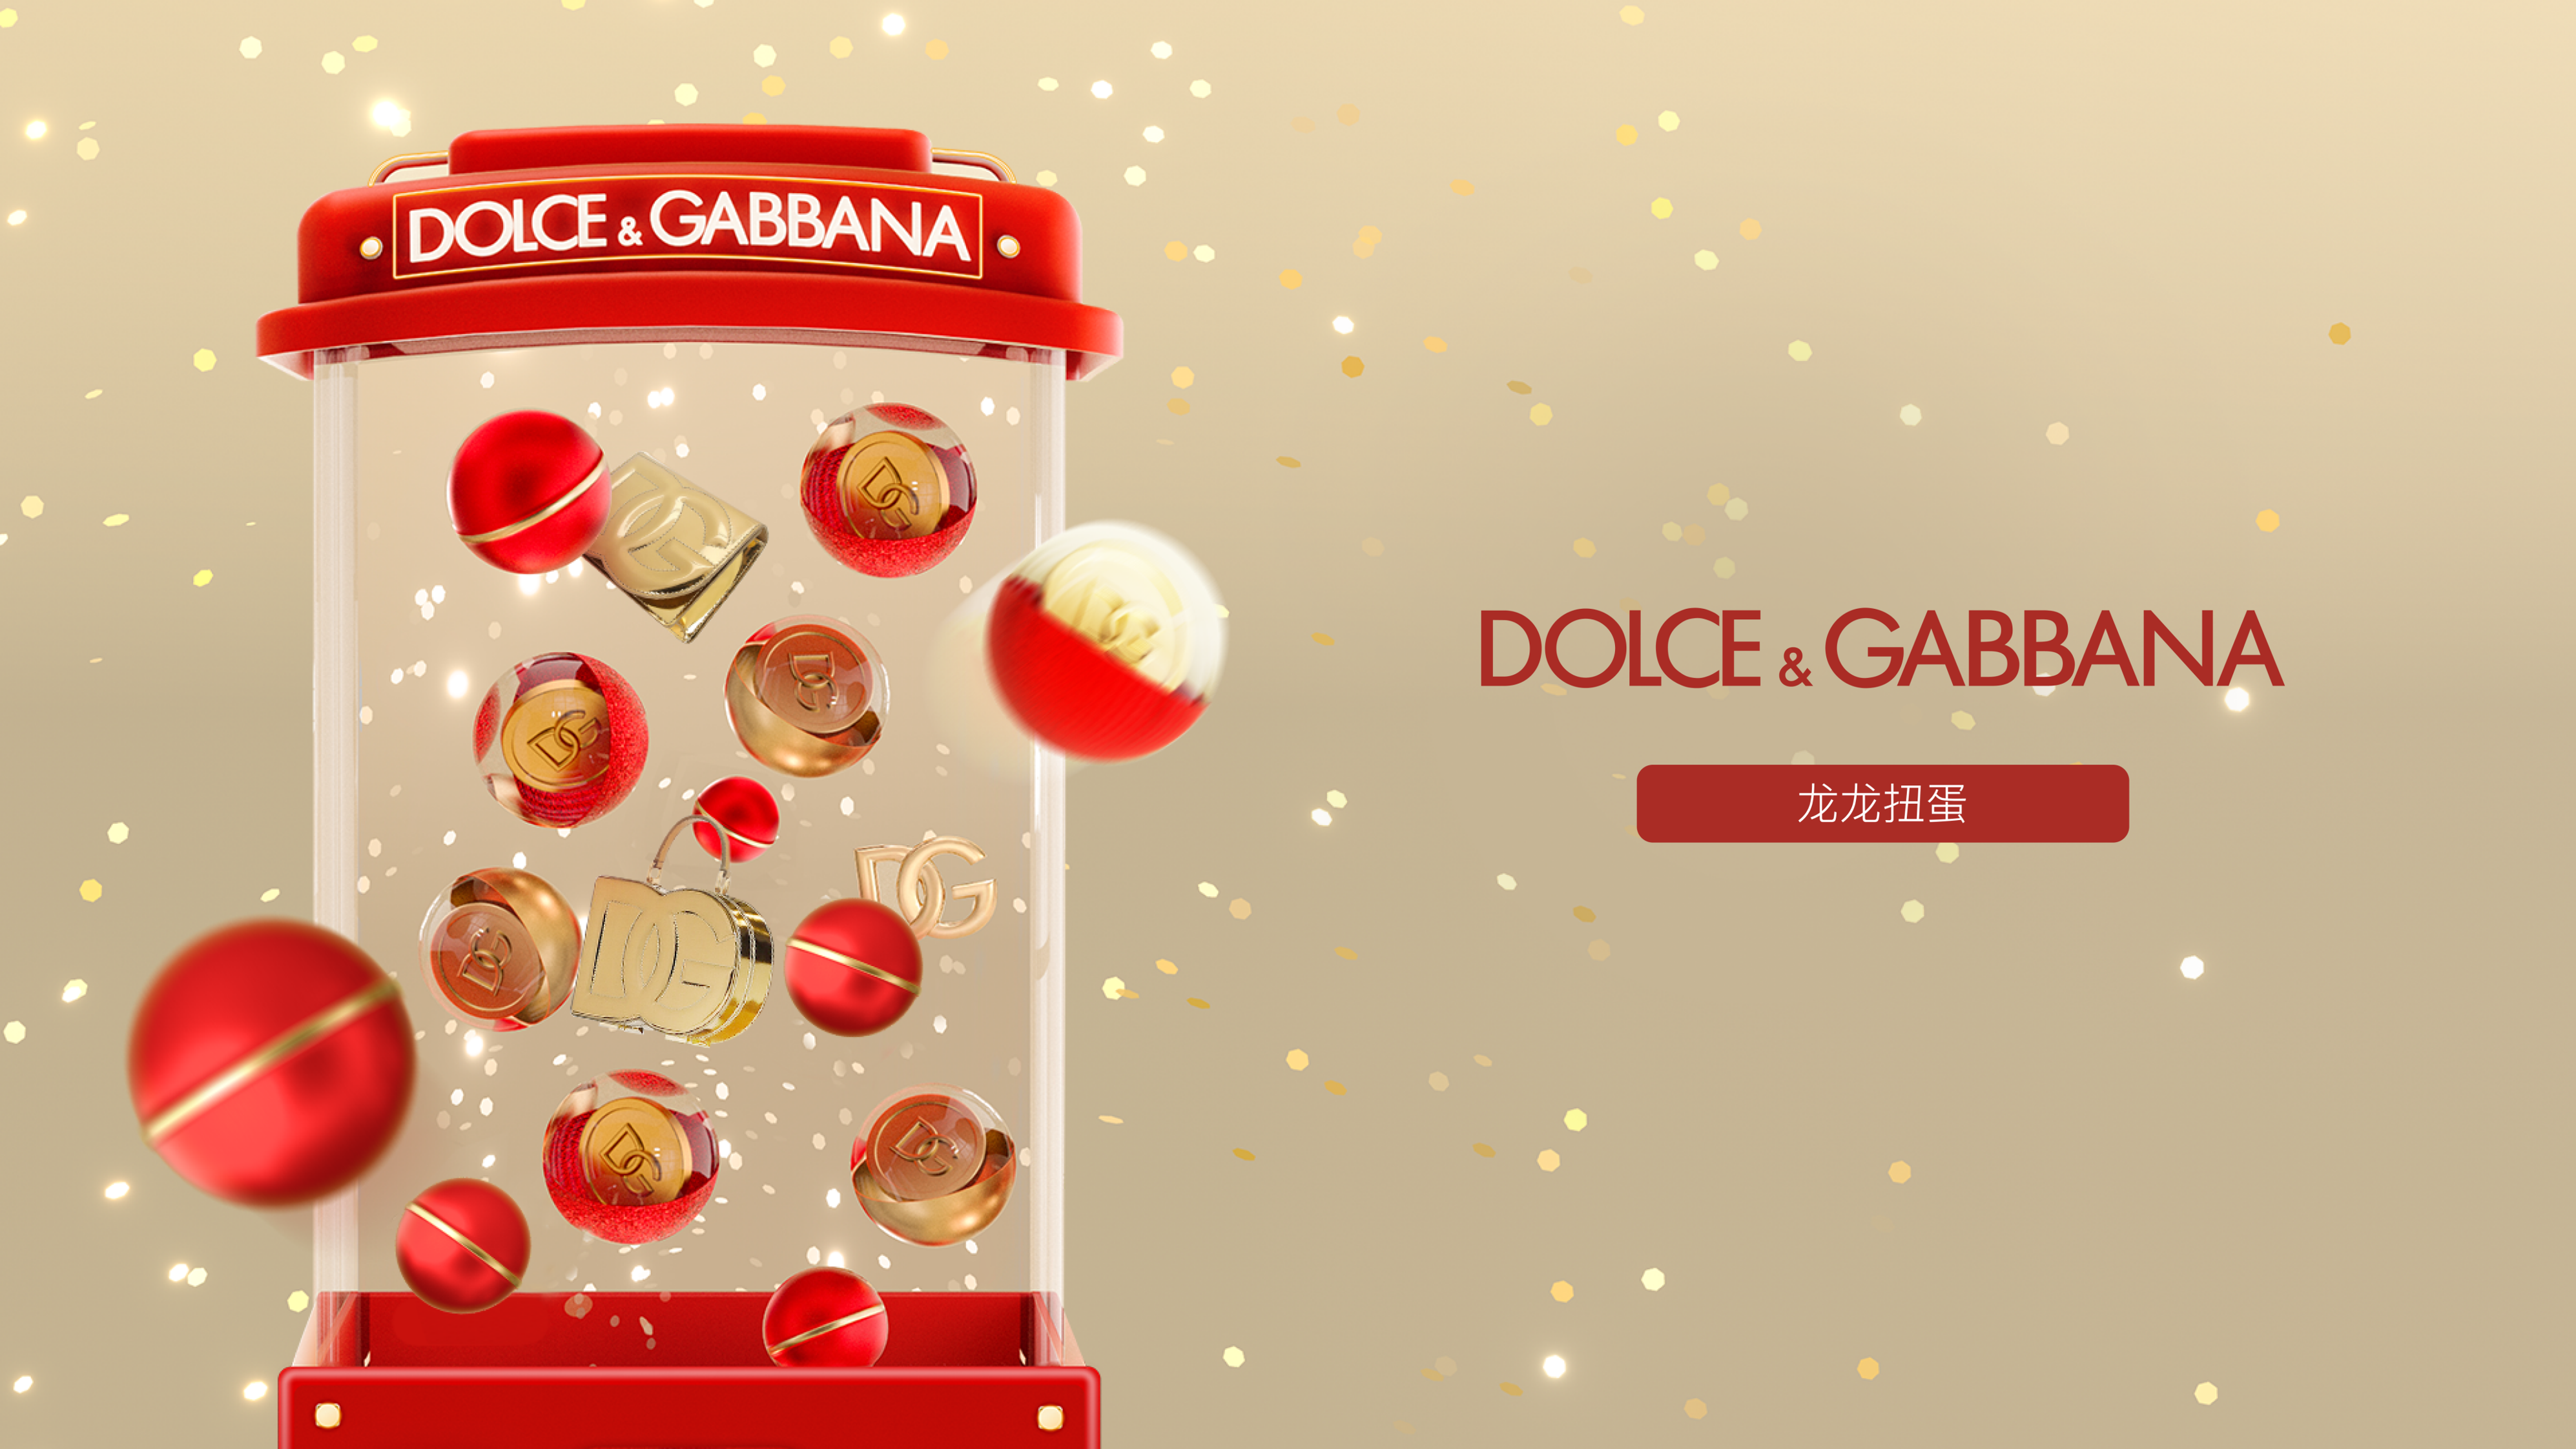 DOLCE & GABBANA’s Dragon Year Emoji Game: Boosting Online Engagement and Store Traffic